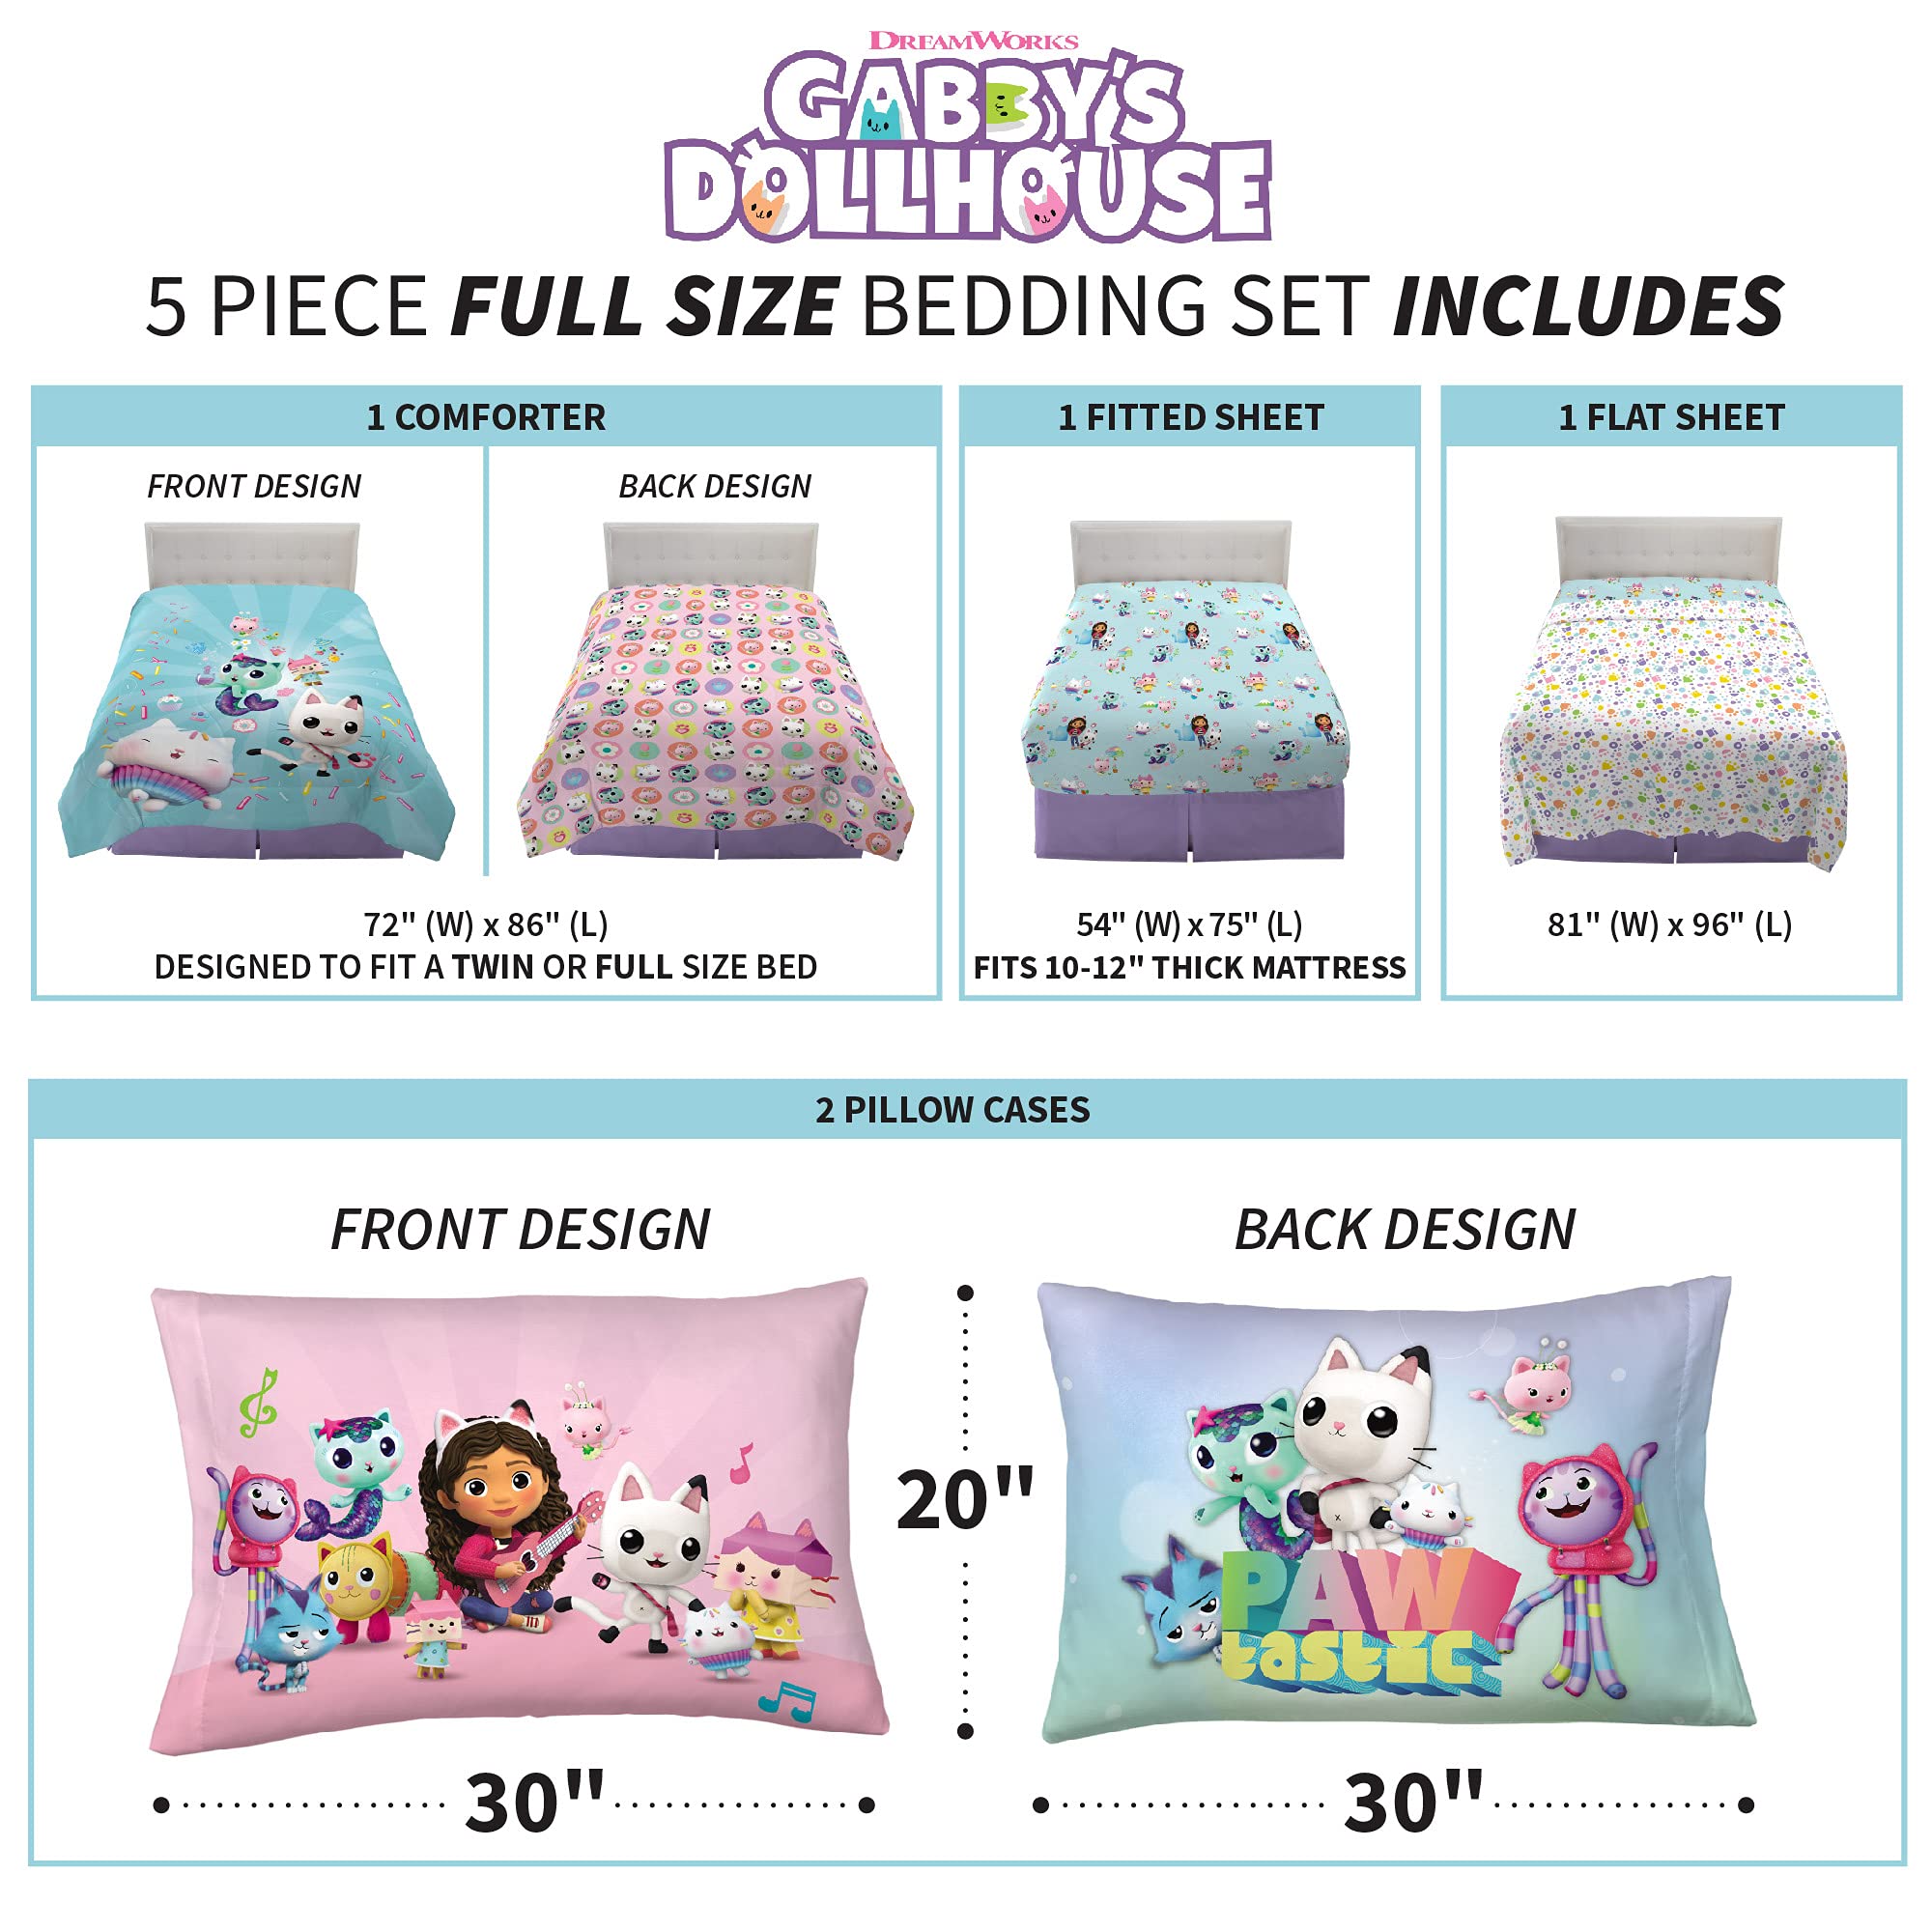 DreamWorks Gabby's Dollhouse Cakey, MerCat And Pandy Kids Bedding Super Soft Comforter And Sheet Set, 5 Piece Full Size, By Franco.